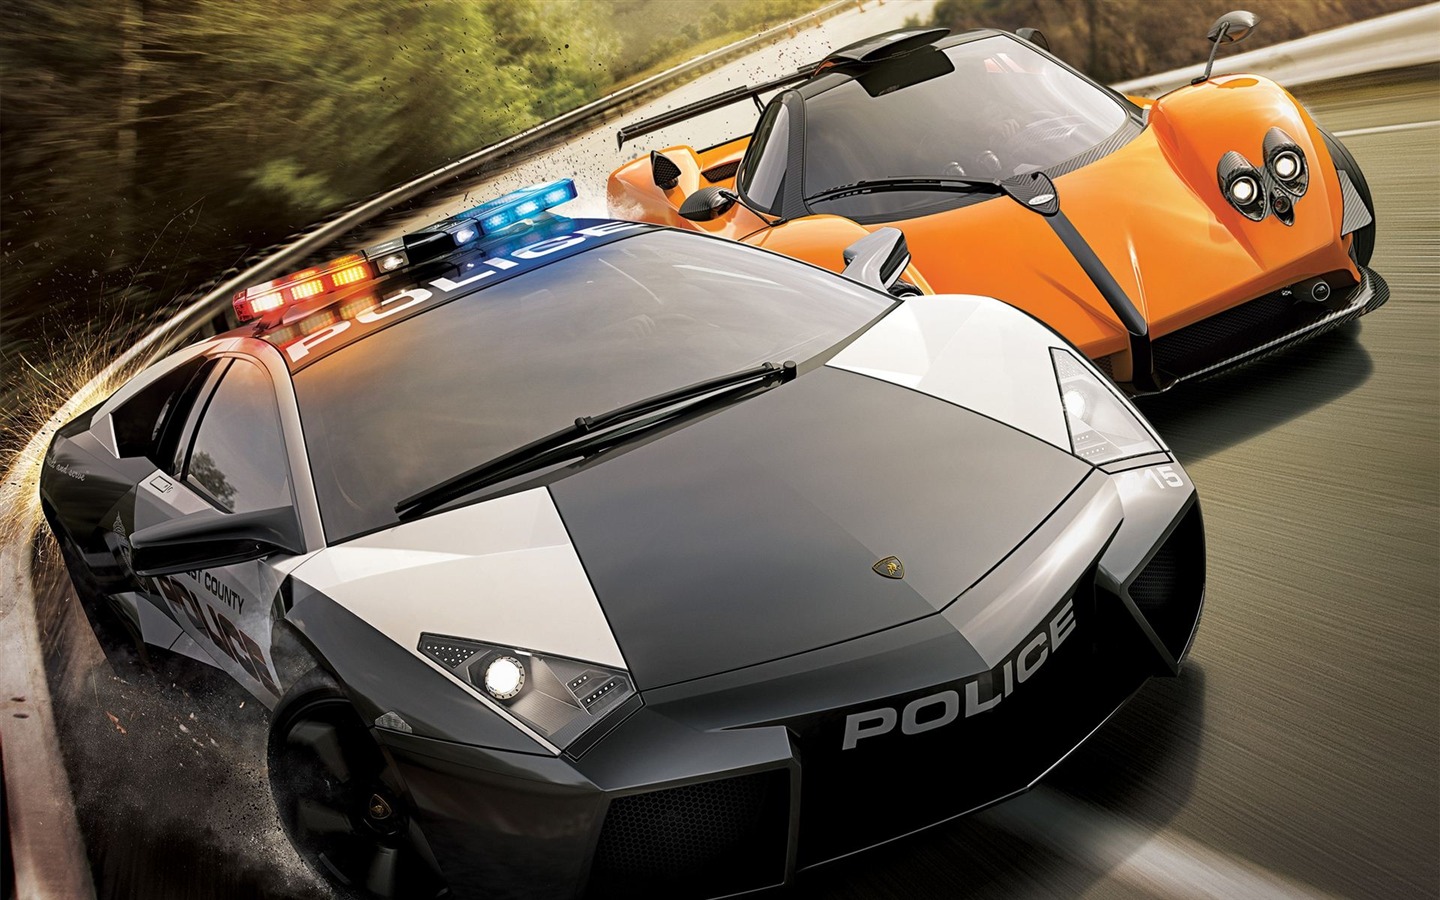 Need for Speed: Hot Pursuit 极品飞车14：热力追踪3 - 1440x900